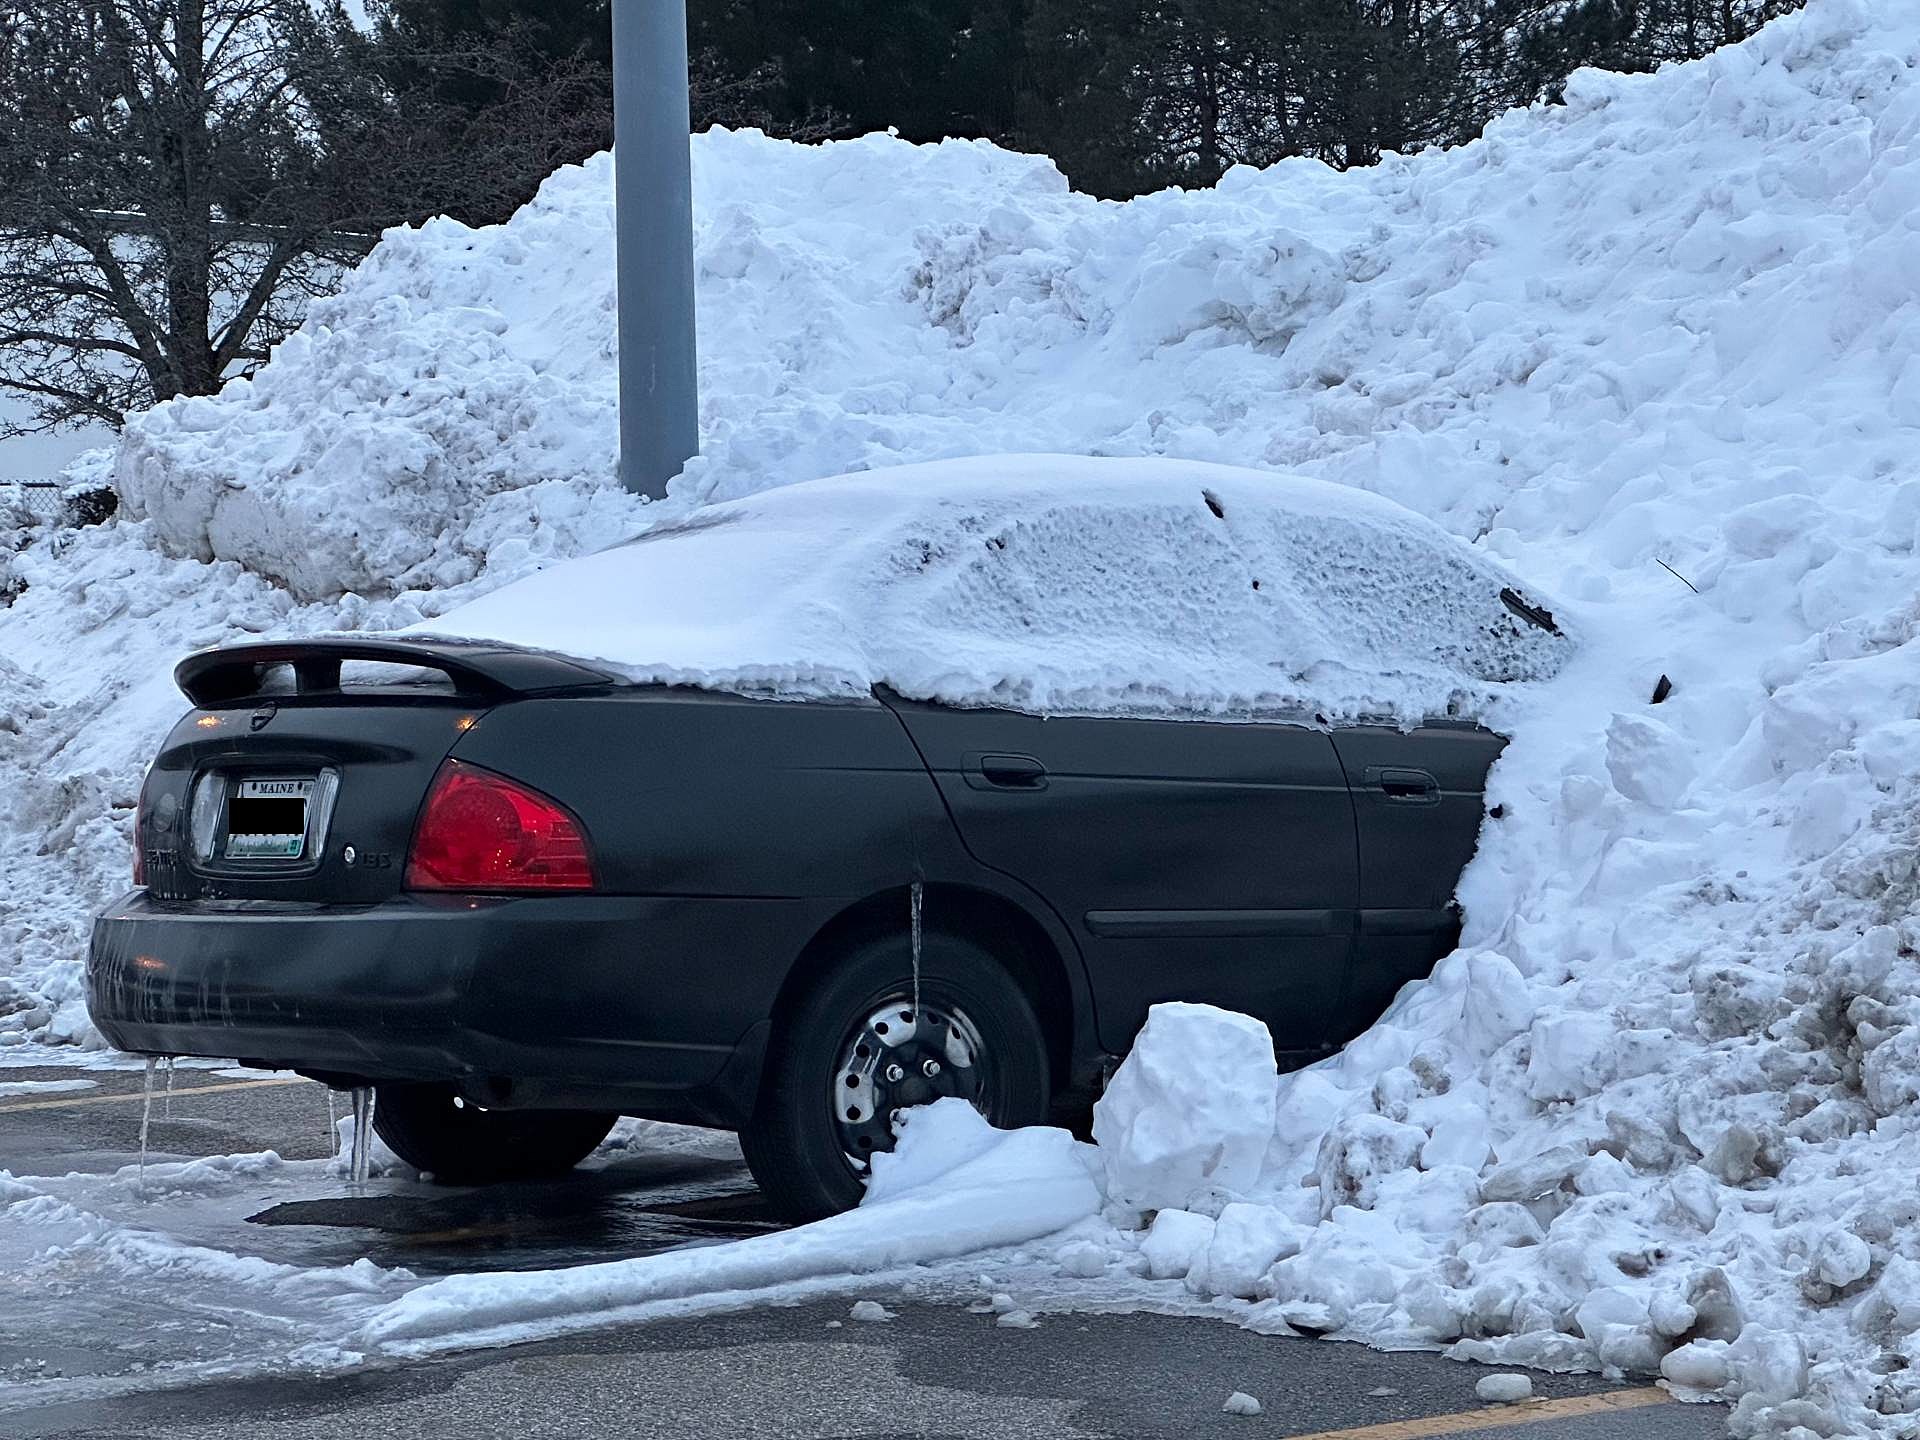 Whats the Story Behind This Car Buried in a Portland Parking